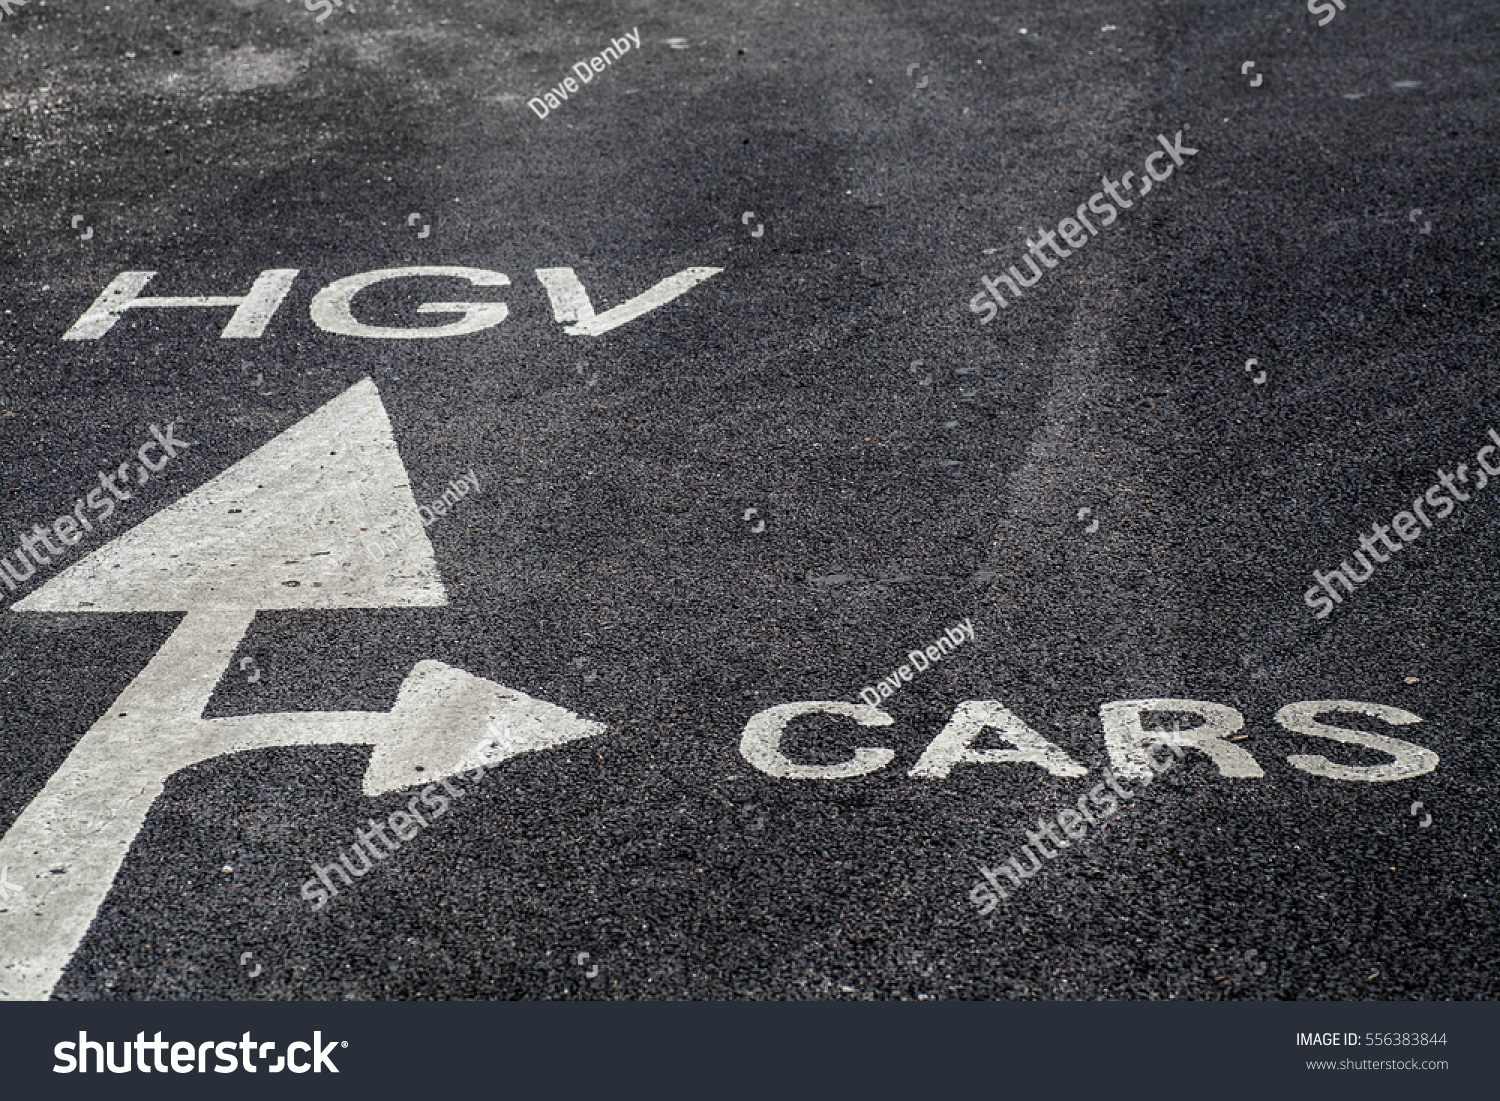 White painted arrow on the tarmac directs cars and trucks to different areas #556383844